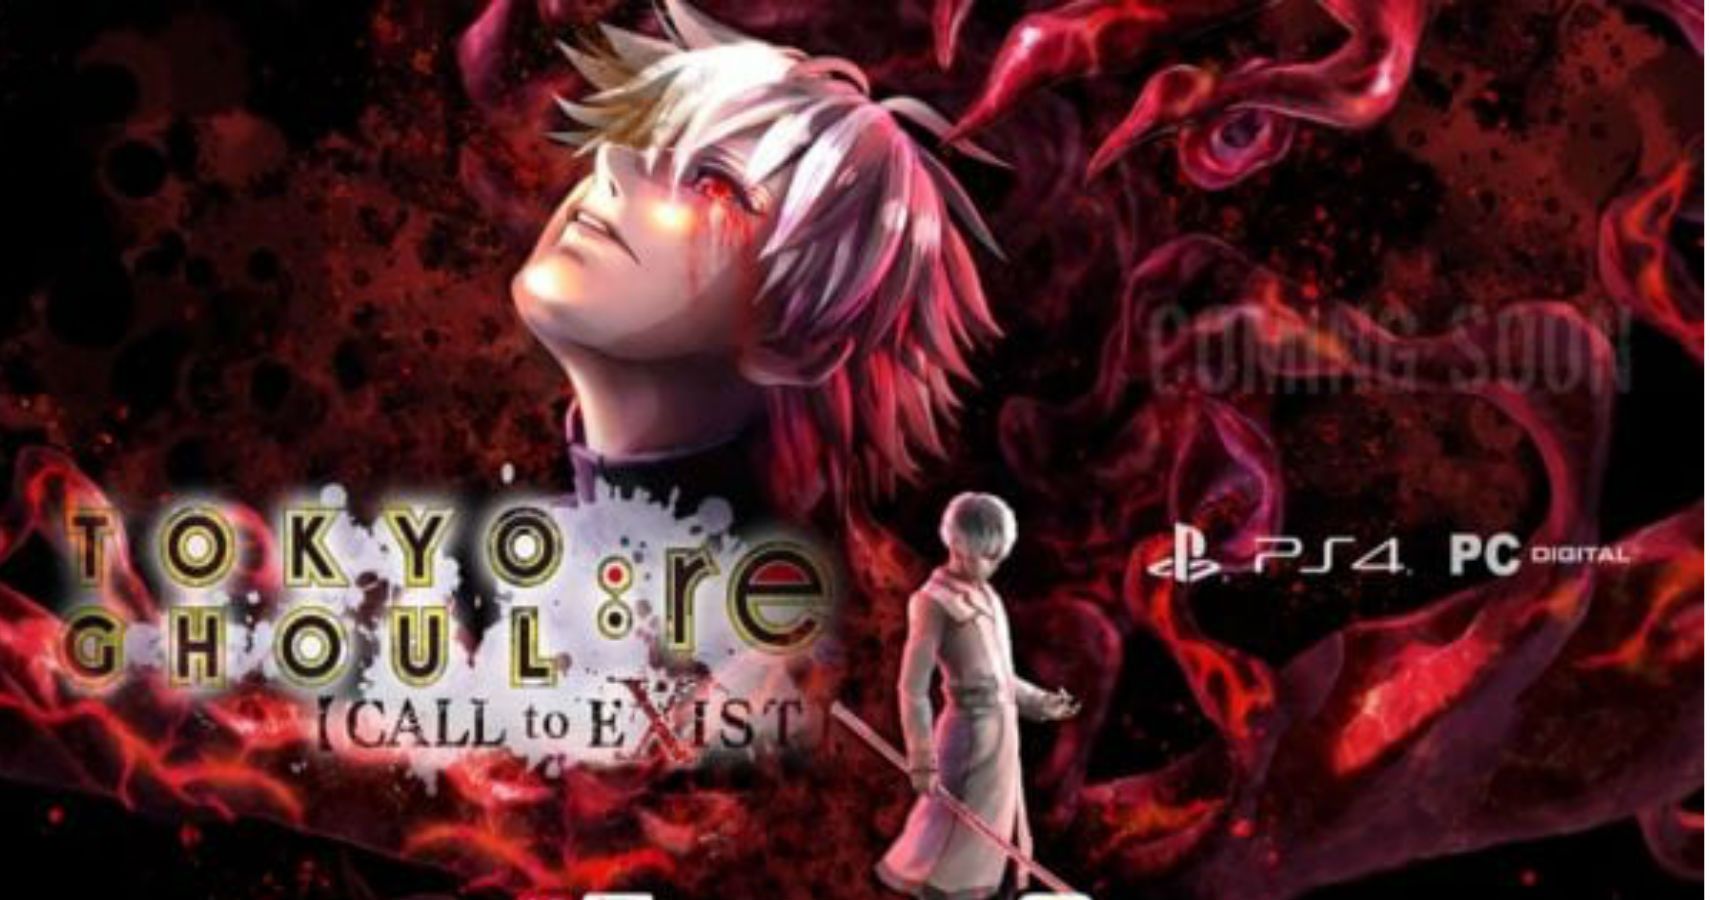 game tokyo ghoul pc